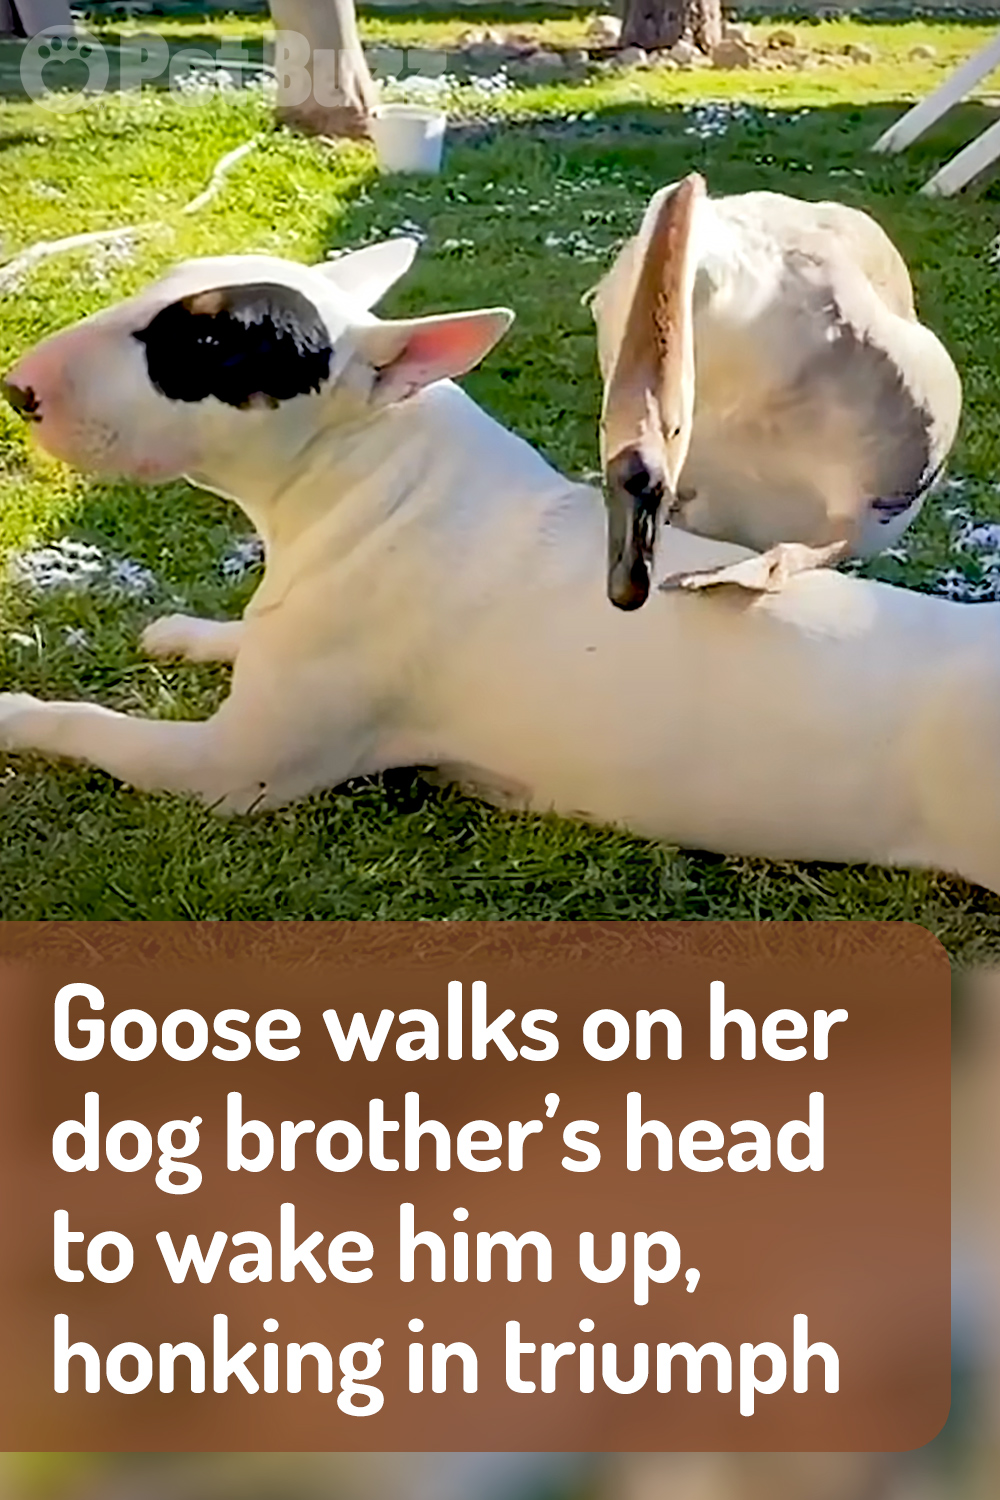 Goose walks on her dog brother’s head to wake him up, honking in triumph